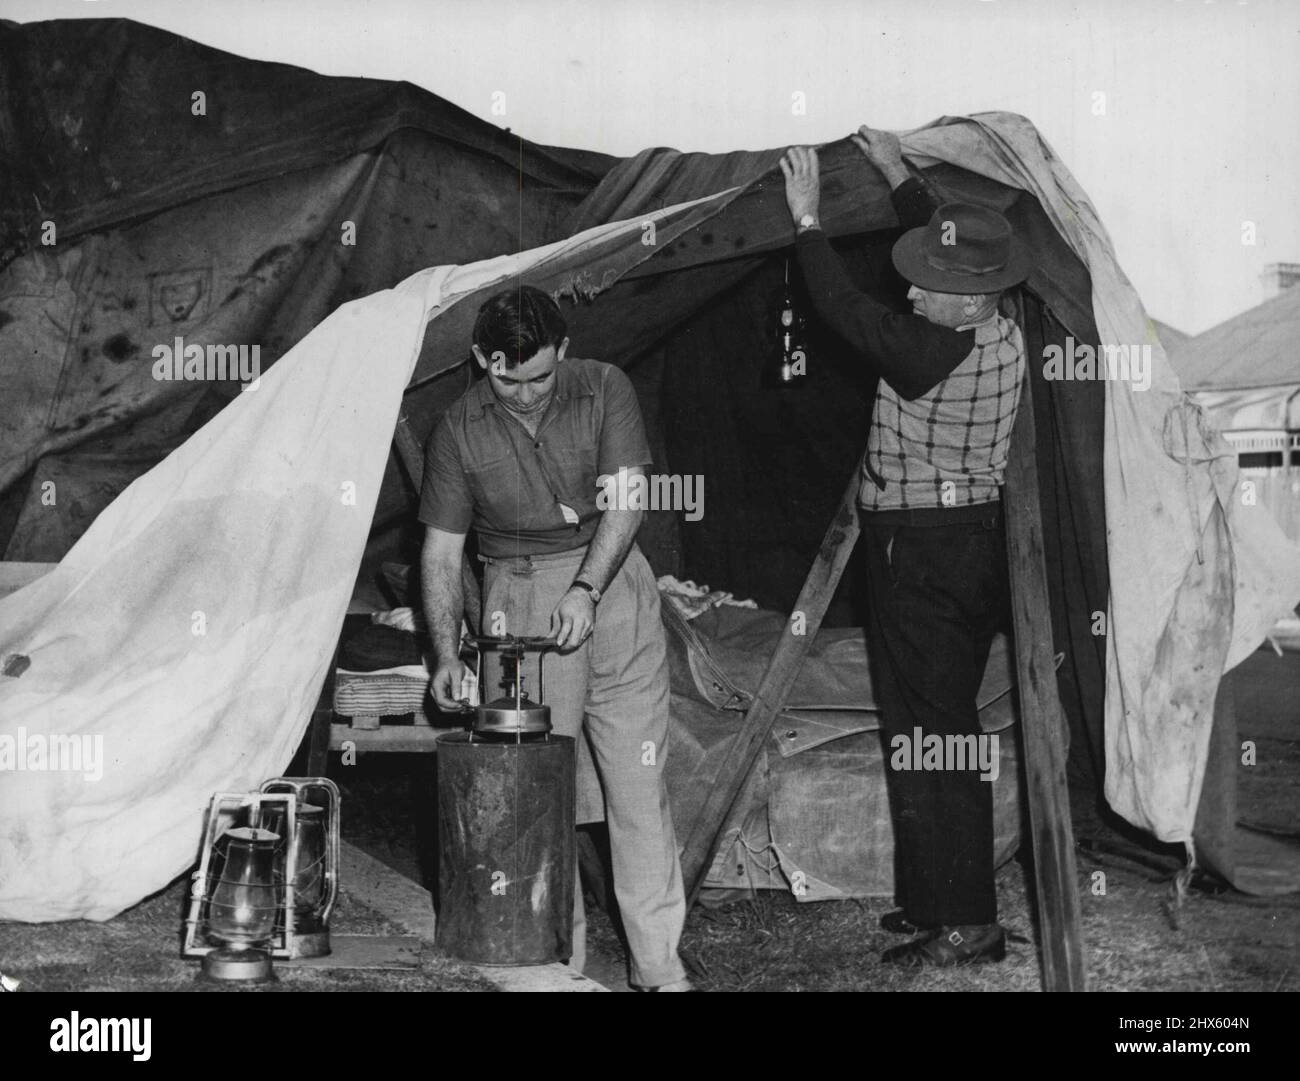 Eviction after 19 yrs Tenancy. Who (left to right): 22 yr old Mr Neville Buckley (Junior) & his father Mr C.Buckley. Where: Haroy St Mascot. When: 7 am. Why: About to prepared breakfast in the tent on the footpath which also covered their furniture & belongings. April 6, 1949. (Photo by Hood).;Eviction after 19 yrs Tenancy. Who (left to right): 22 yr old Mr Neville Buckley (Junior) & his father Mr C.Buckley. Where: Haroy St Mascot. When: 7 am. Why: About to prepared breakfast in the tent on the Stock Photo